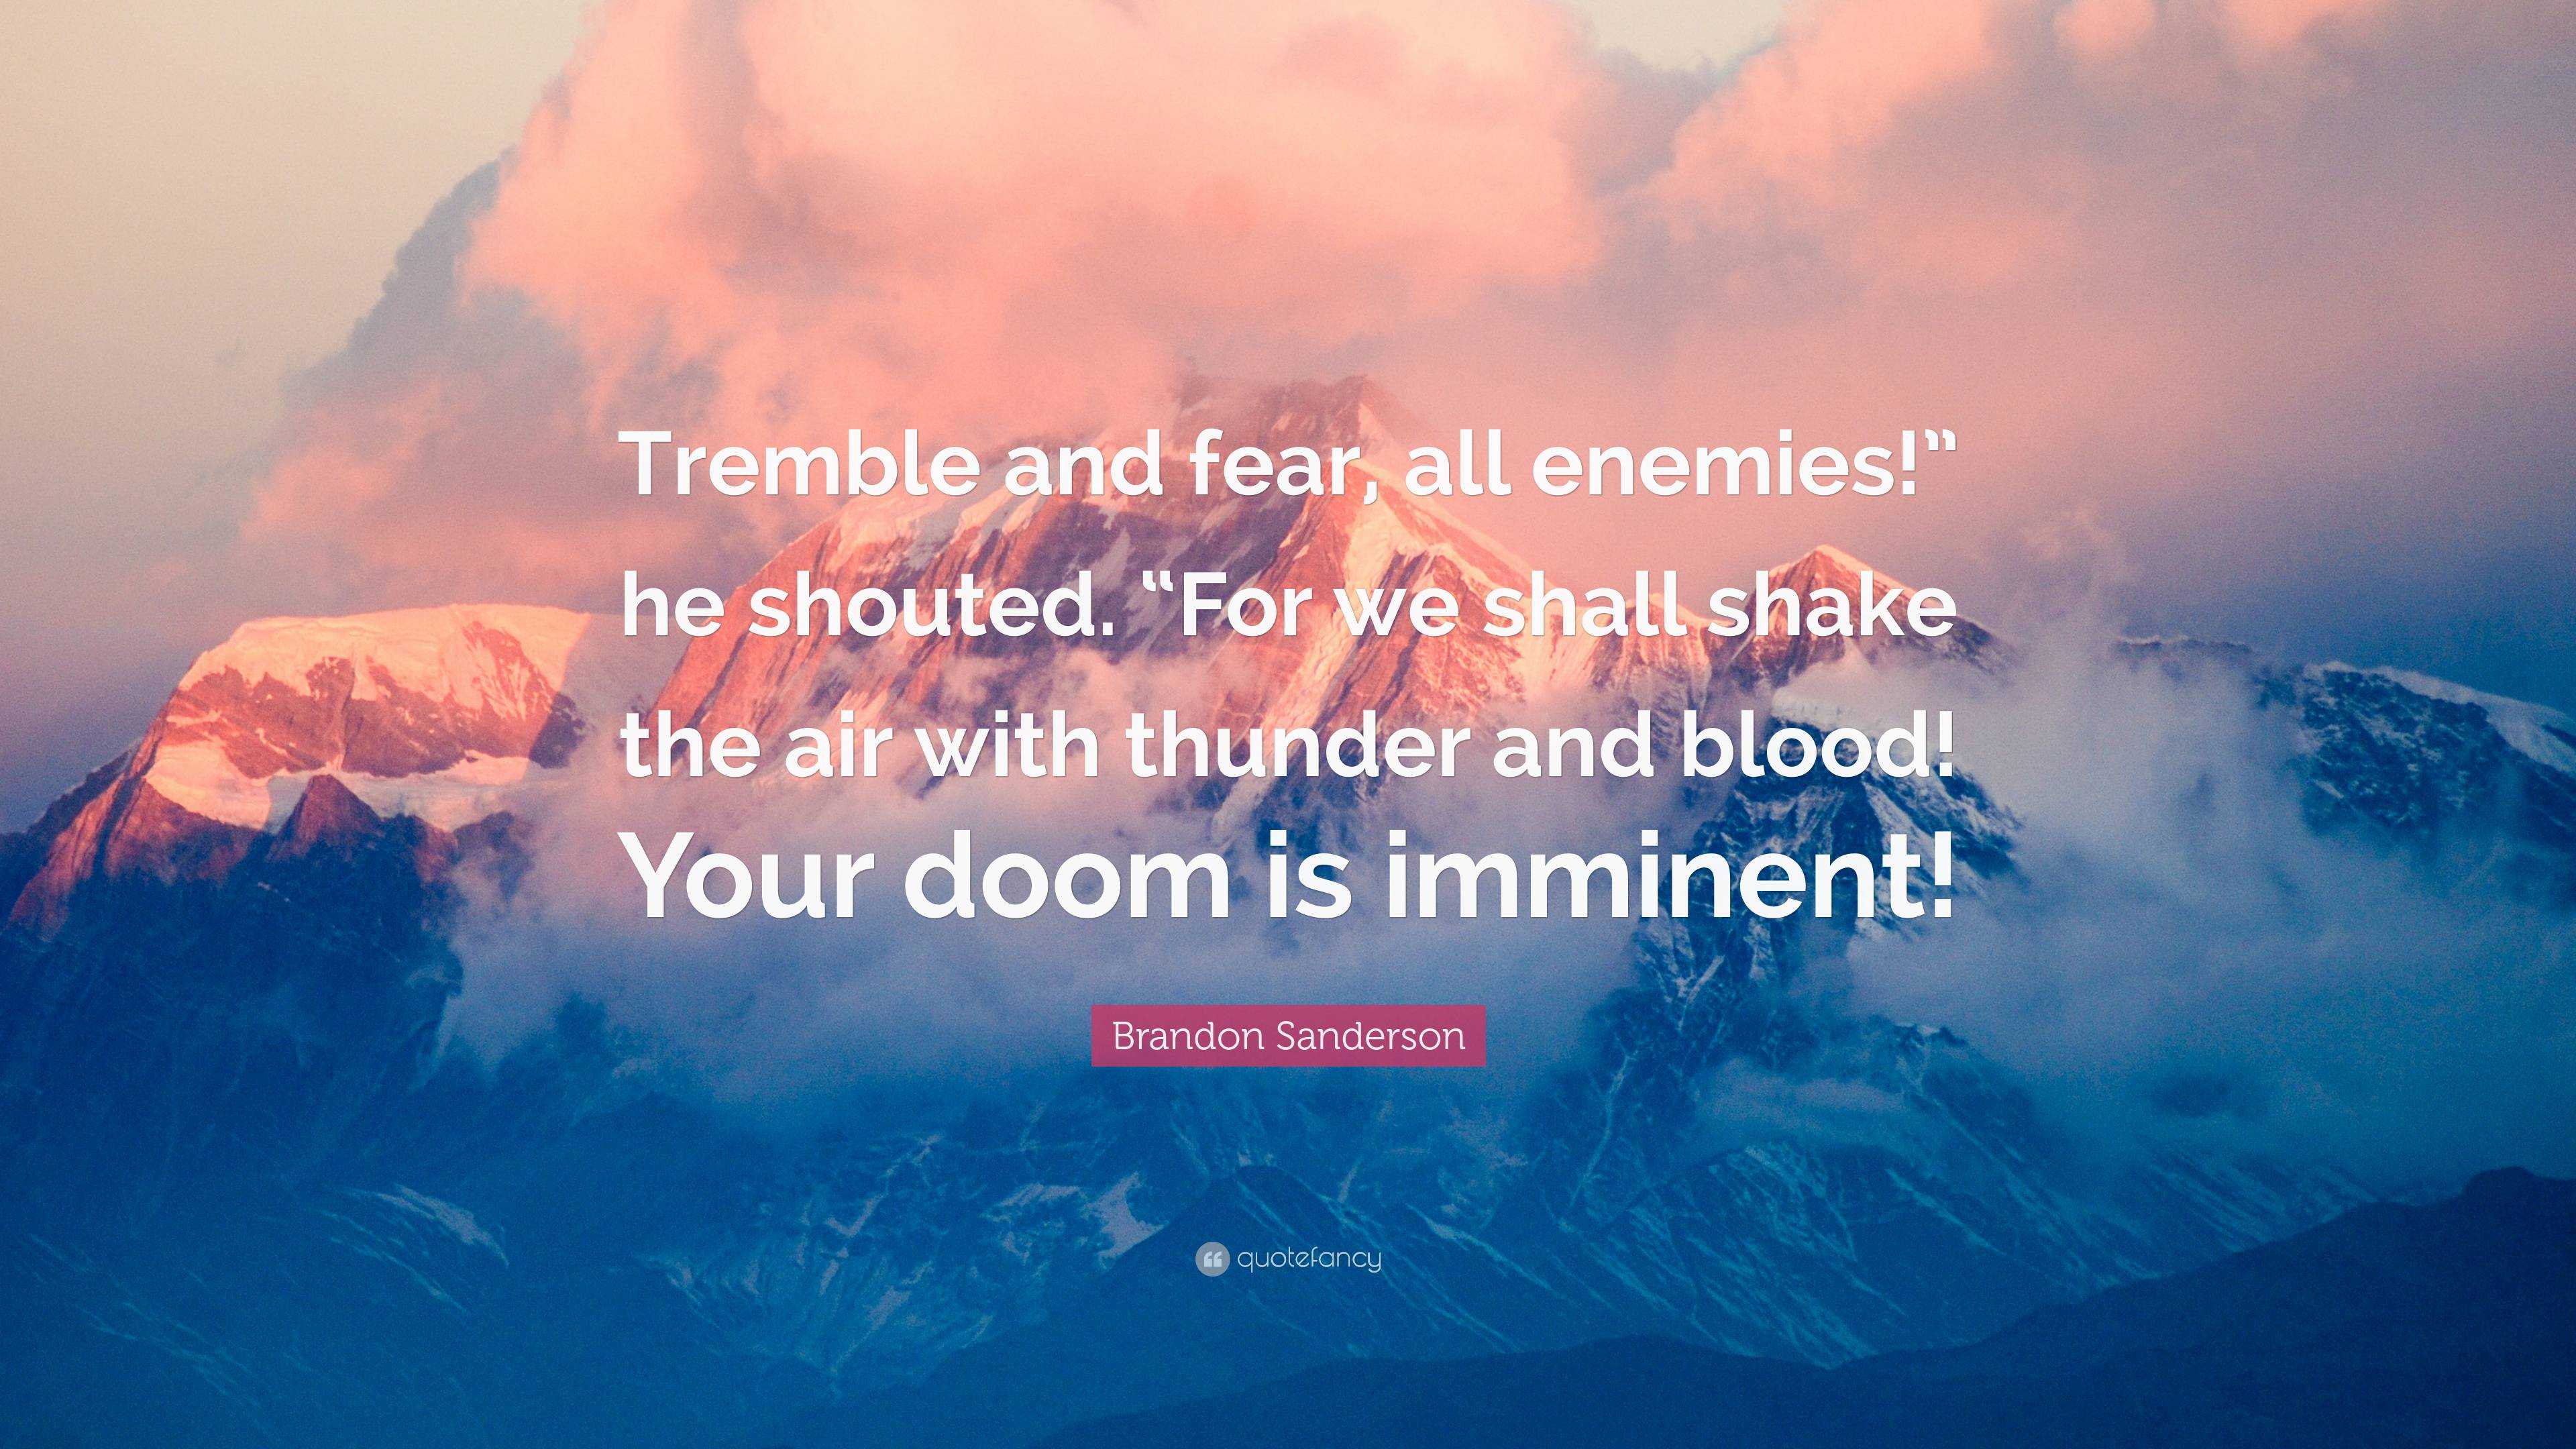 https://quotefancy.com/media/wallpaper/3840x2160/6390502-Brandon-Sanderson-Quote-Tremble-and-fear-all-enemies-he-shouted.jpg